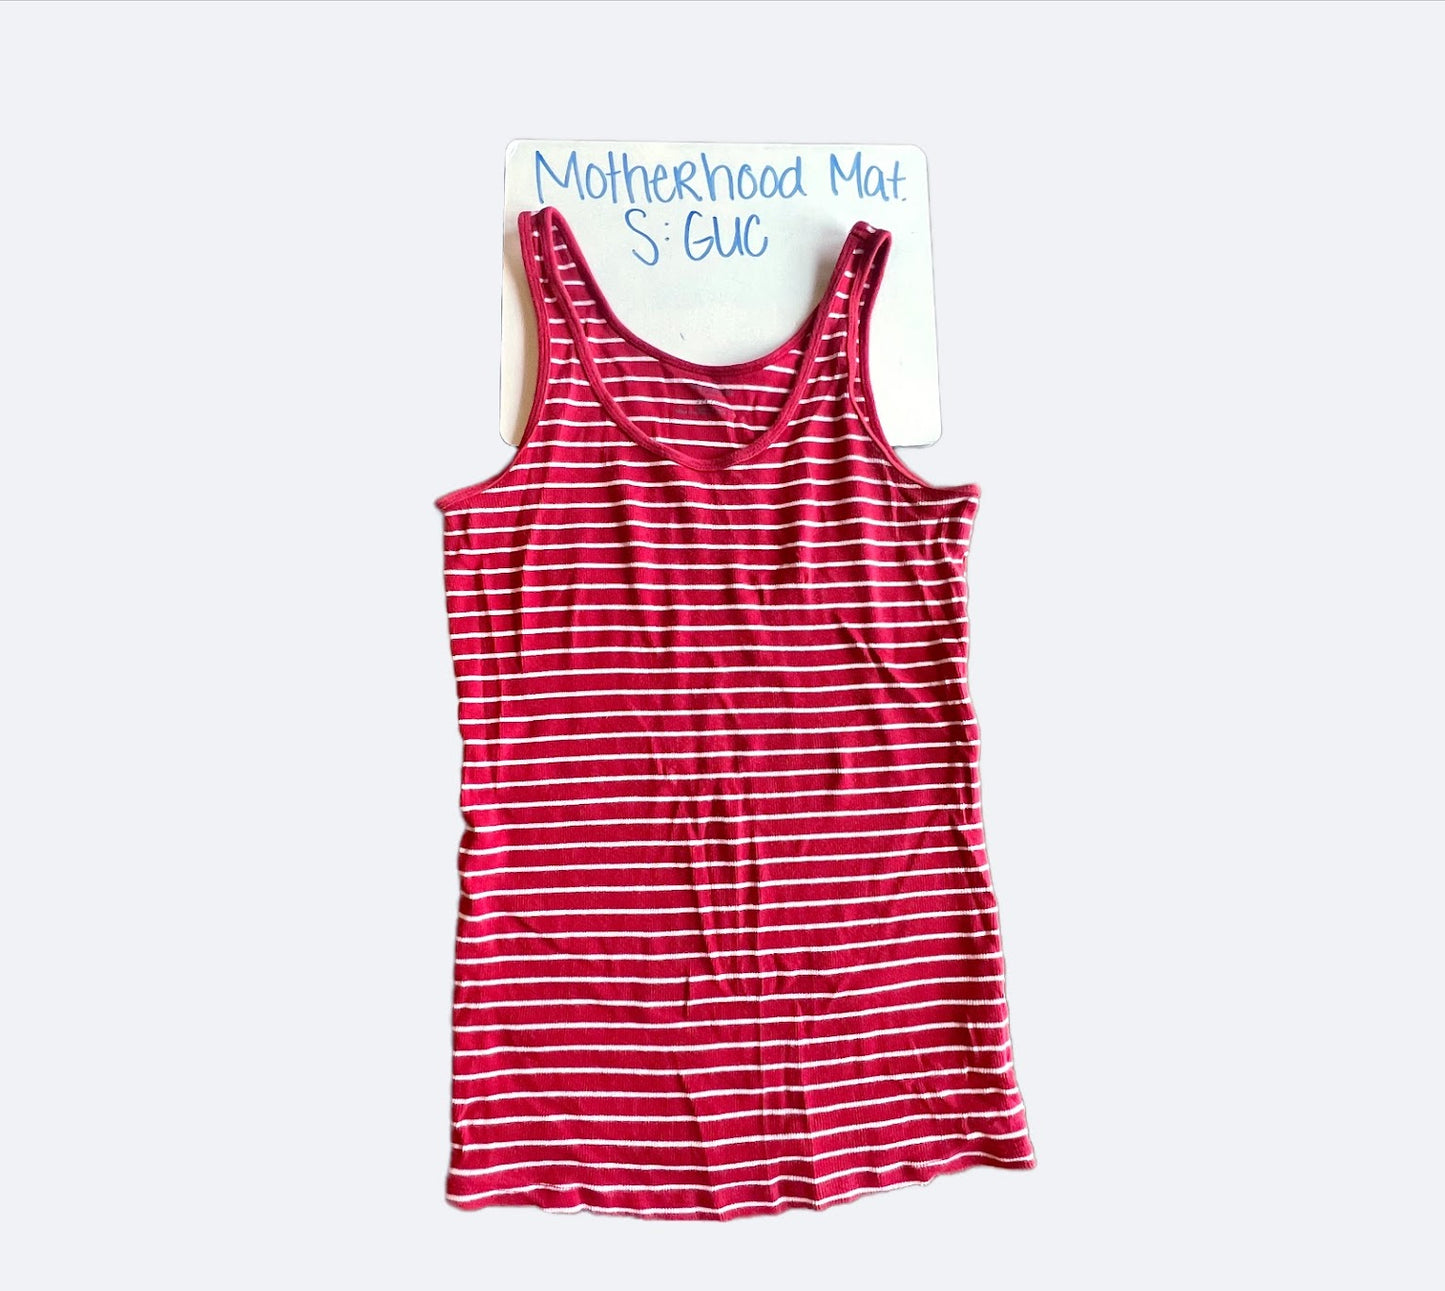 Motherhood Maternity Size Small Fitted Tank Top, GUC